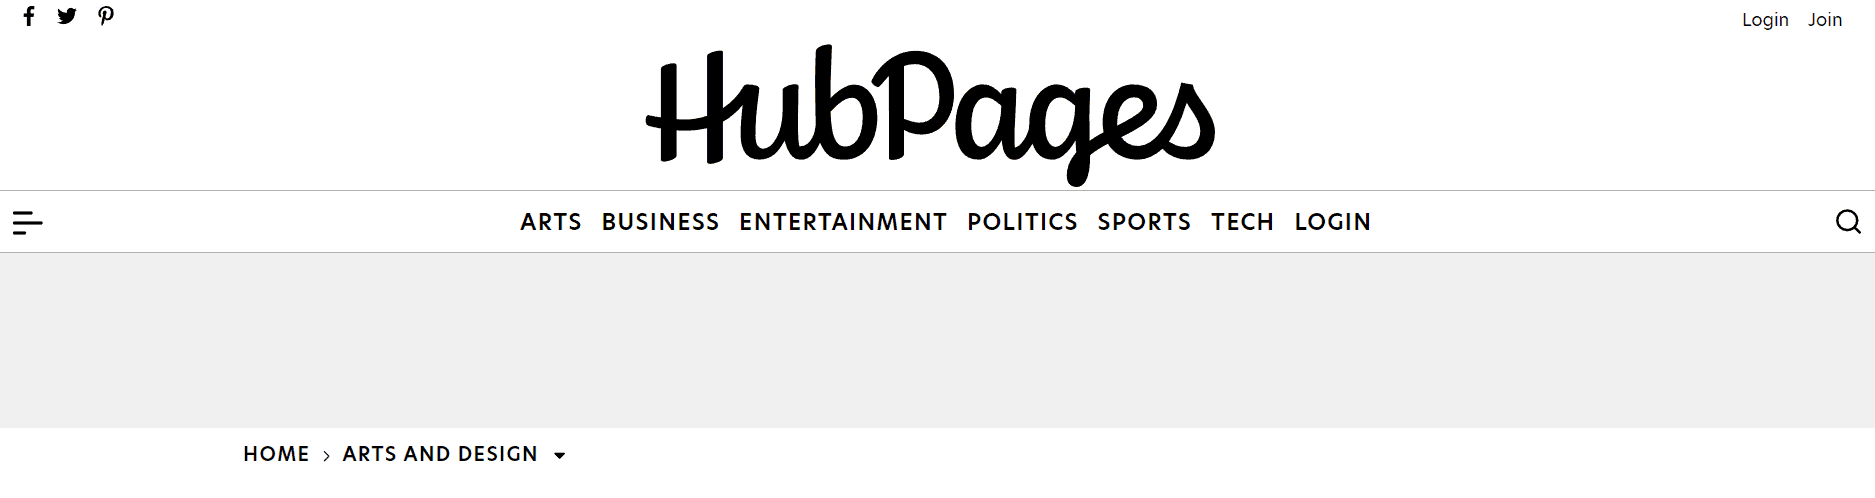 HubPages Overview